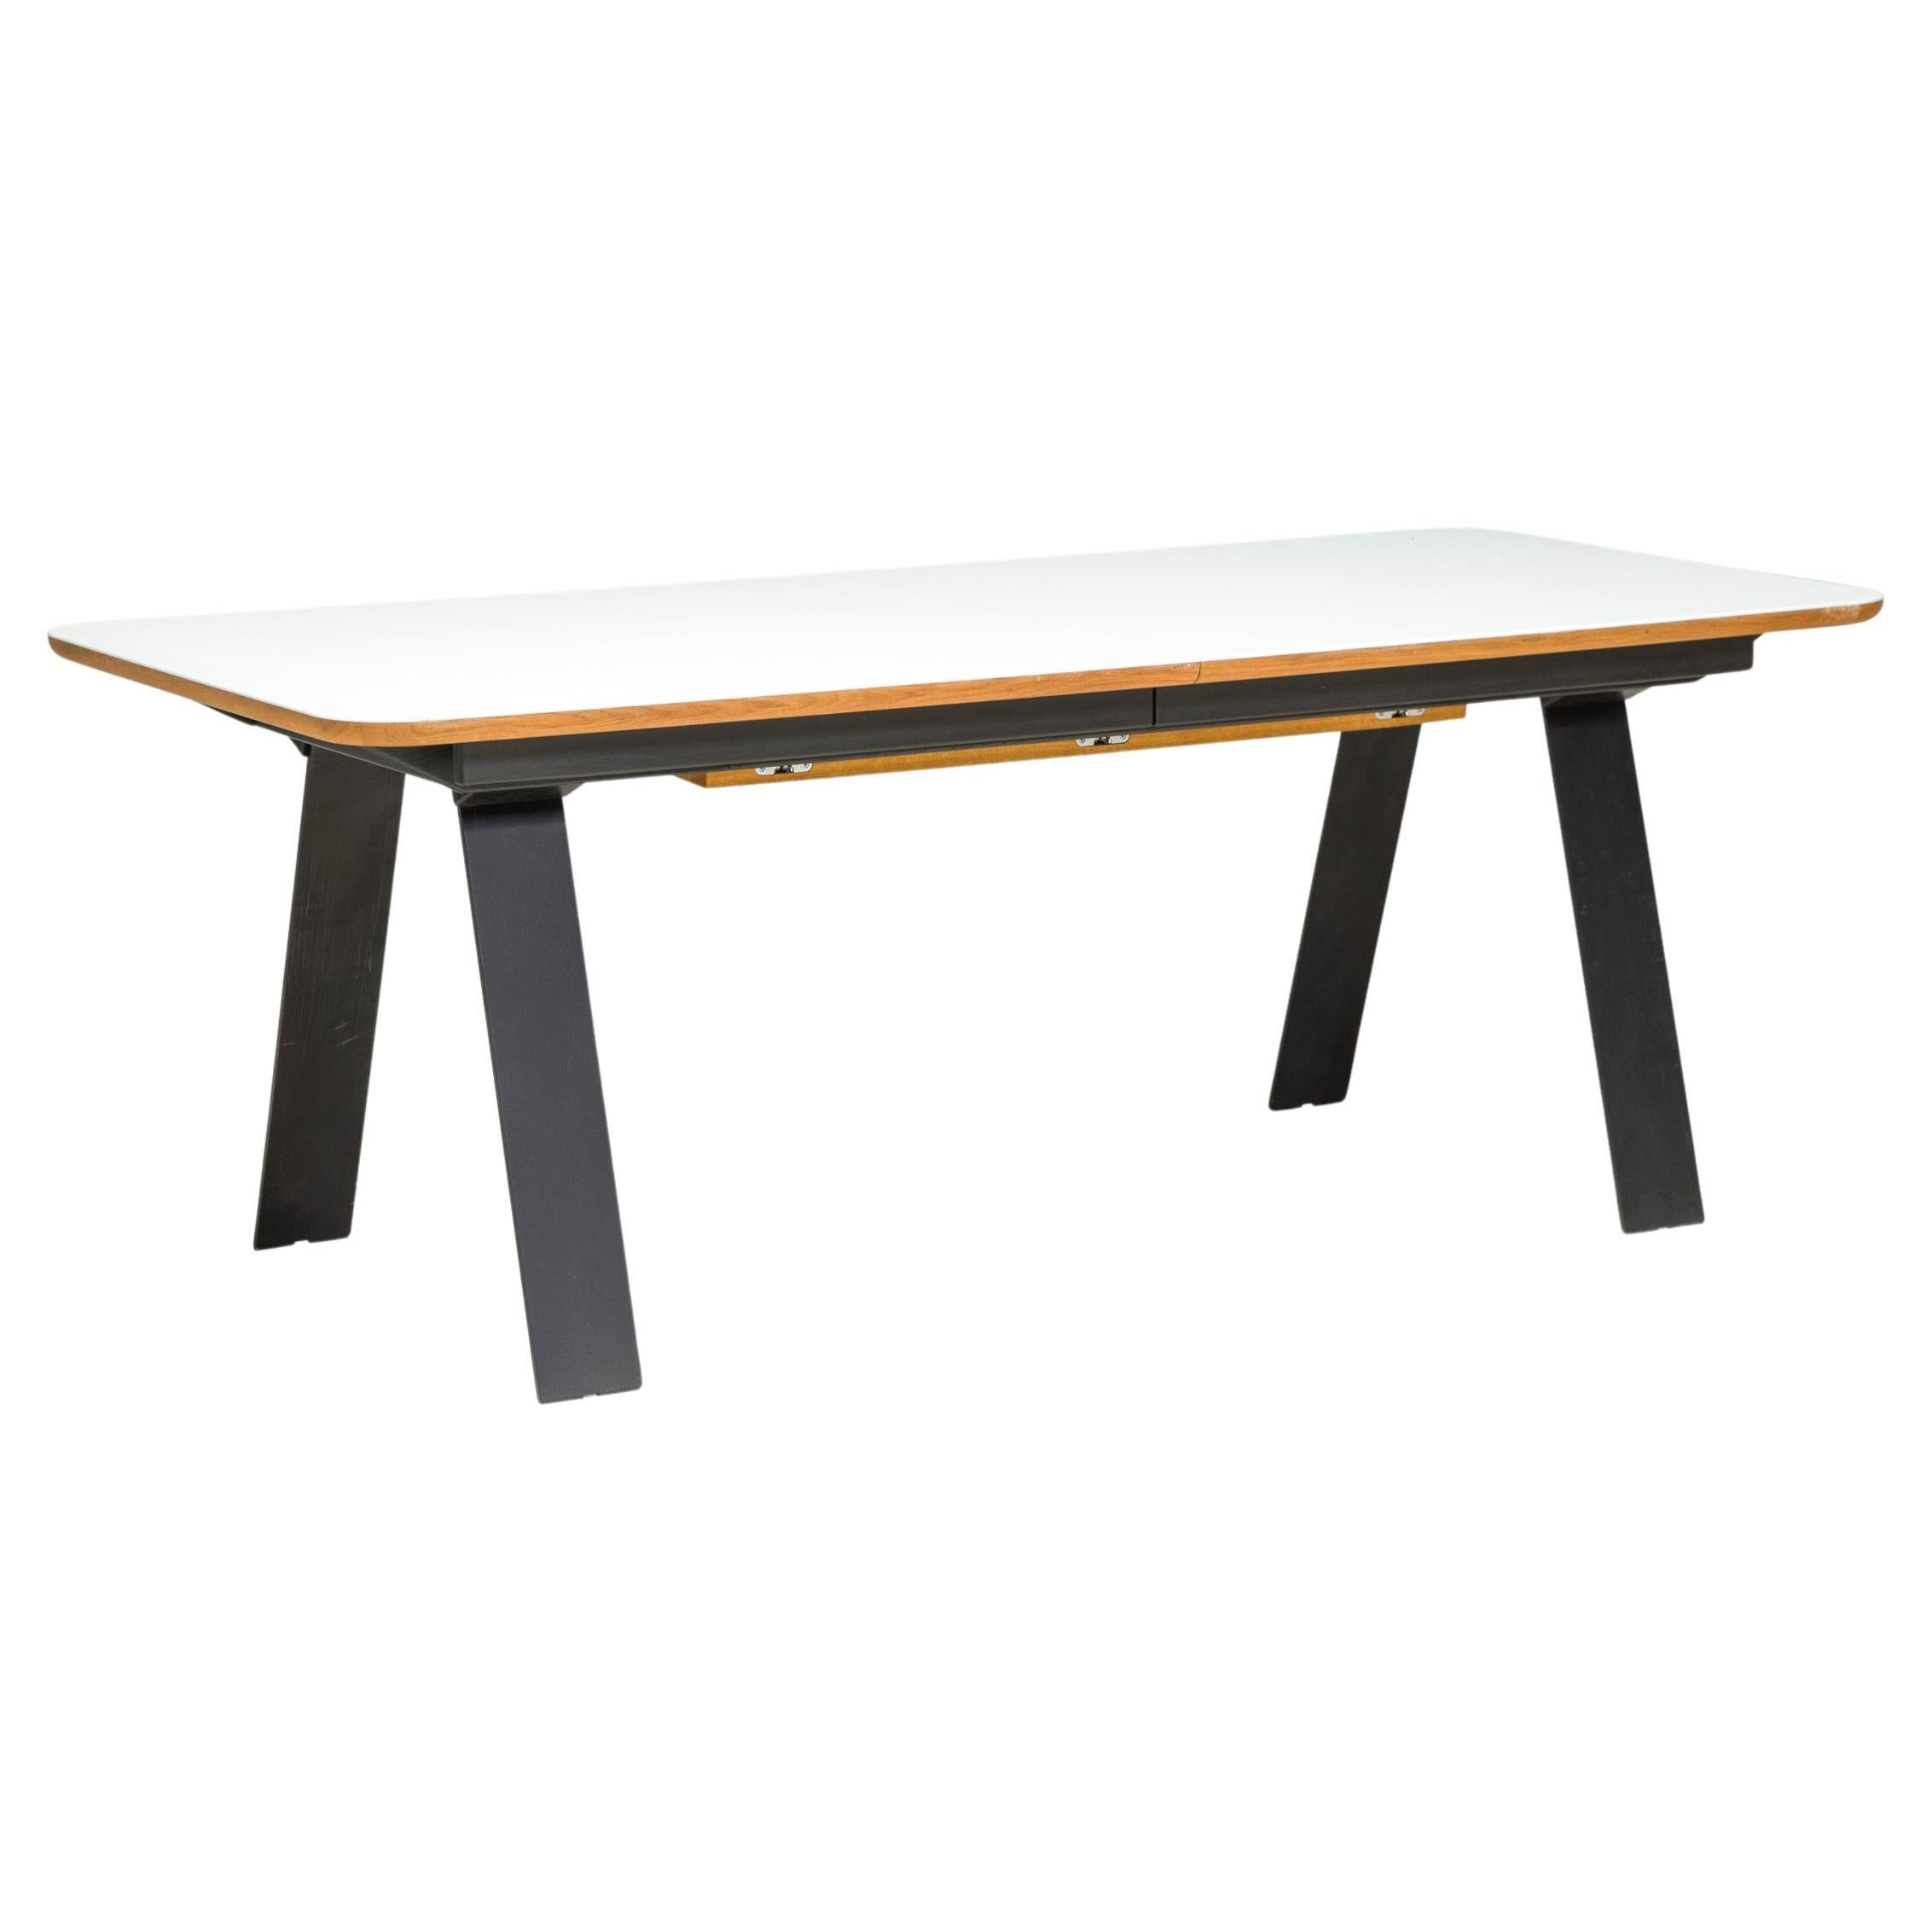 Nissen & Gehl MDD for Naver GM 3400 Chess Extending Dining Table, 2018 For Sale